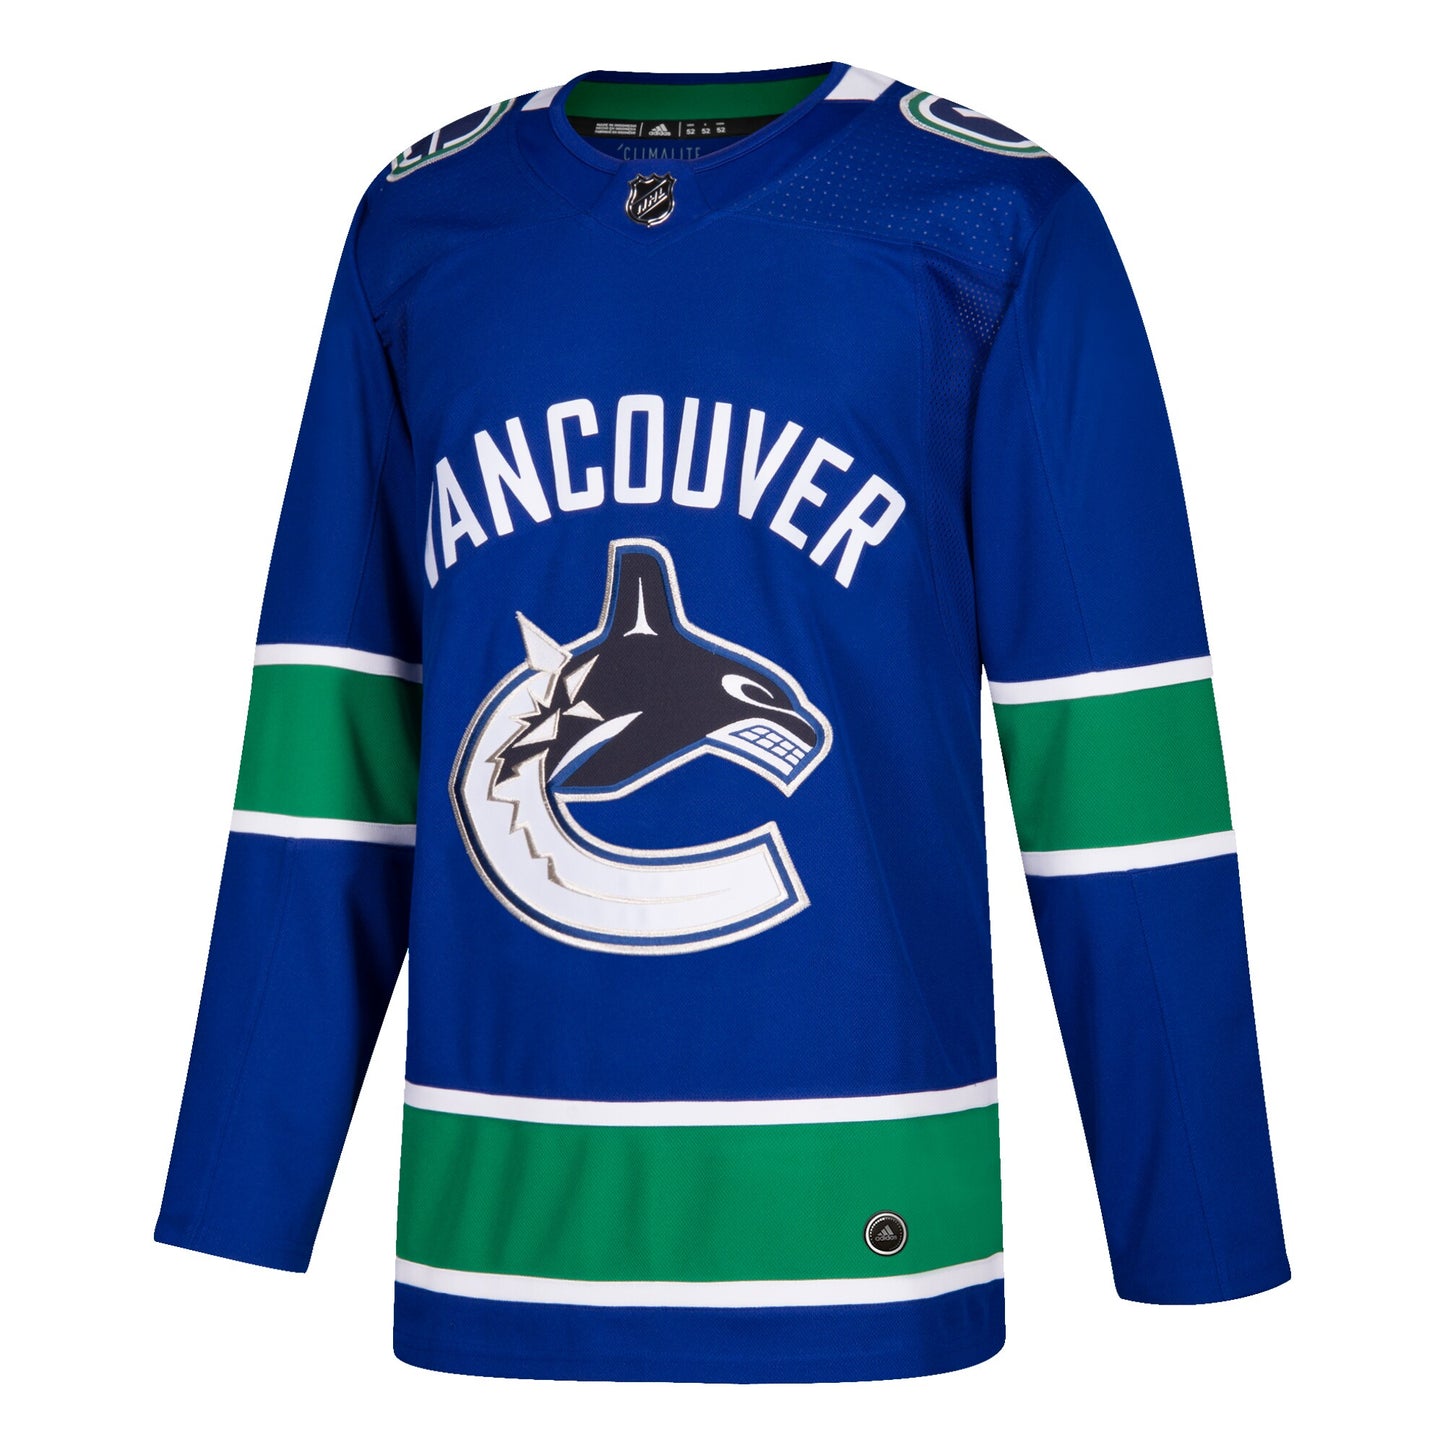 Vancouver Canucks adidas Home Authentic Blank Jersey - Blue